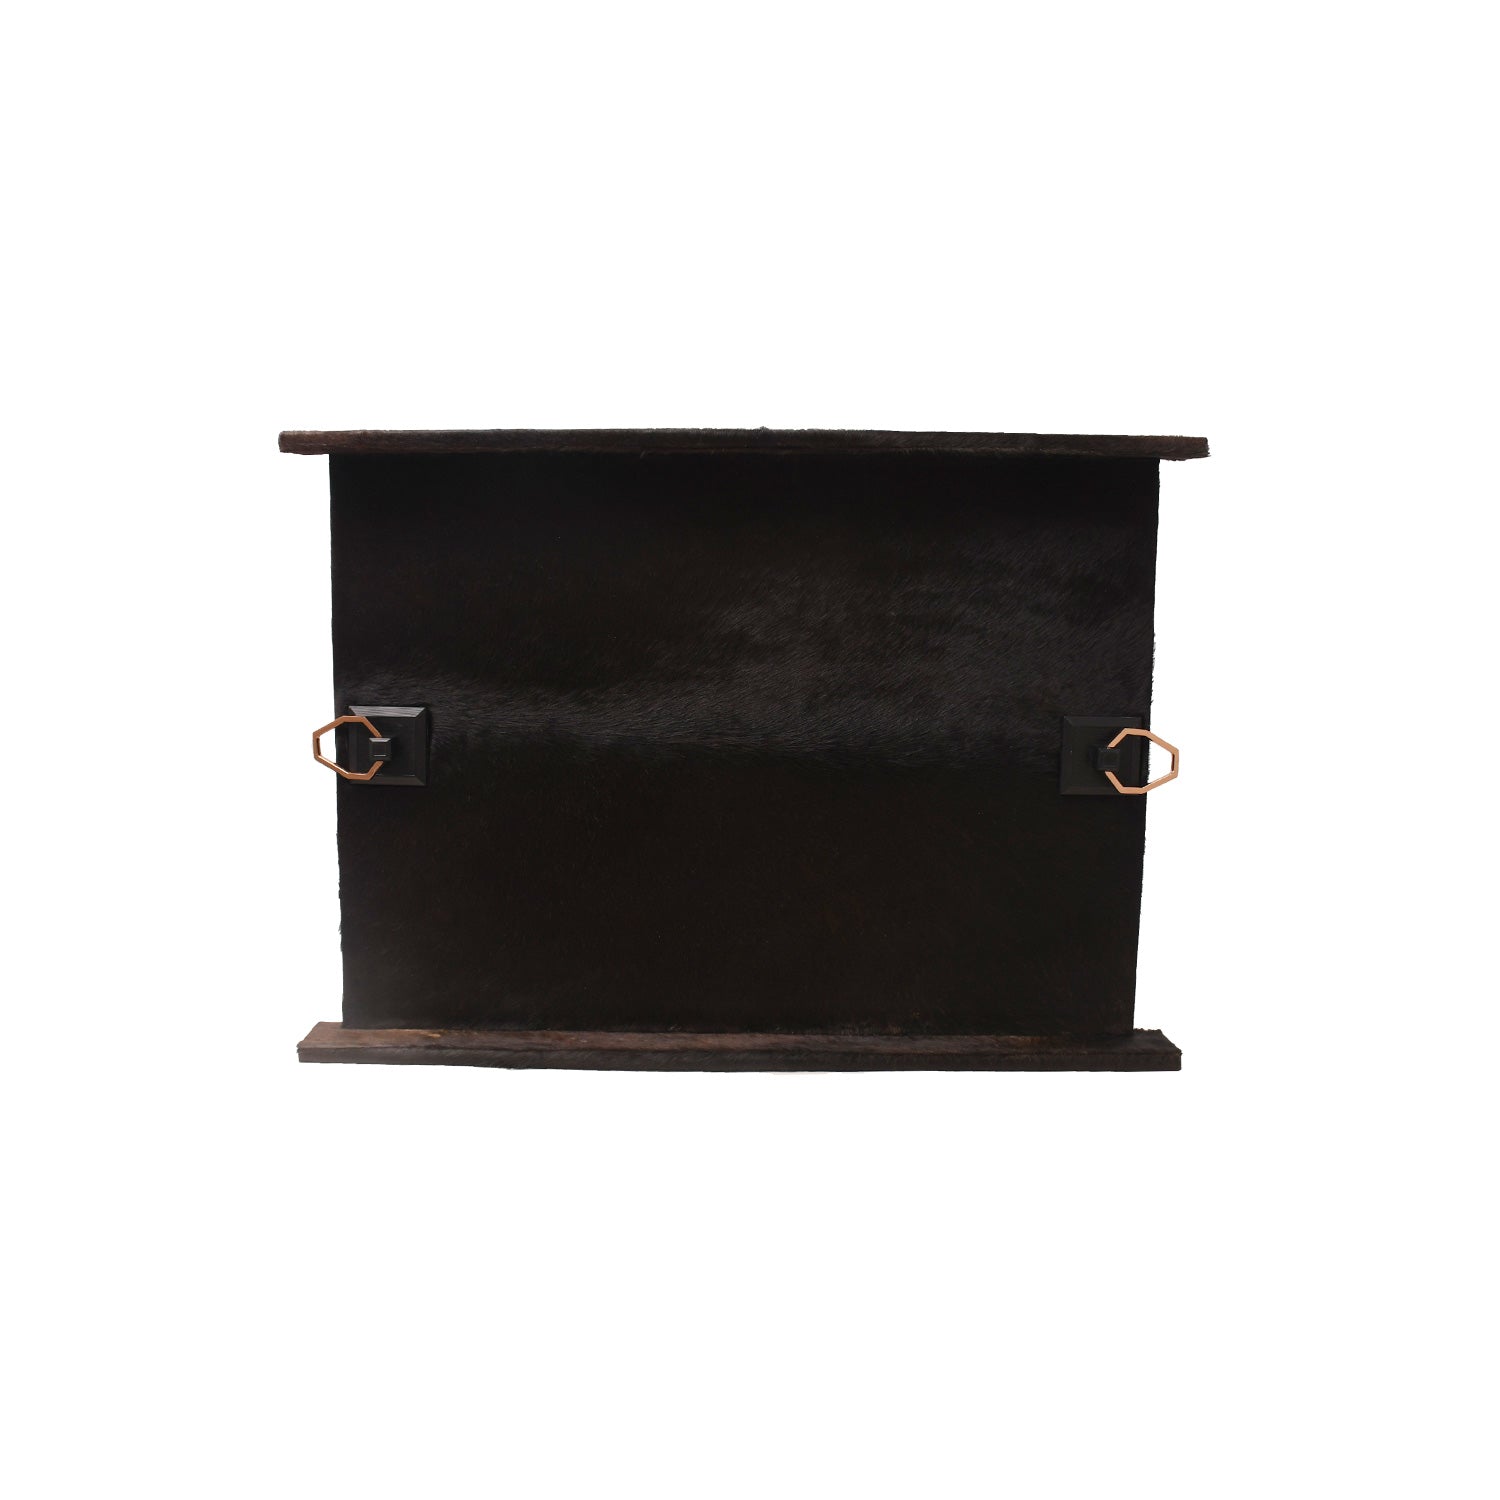 Brown Natural Hair-On Leather Tray Standing